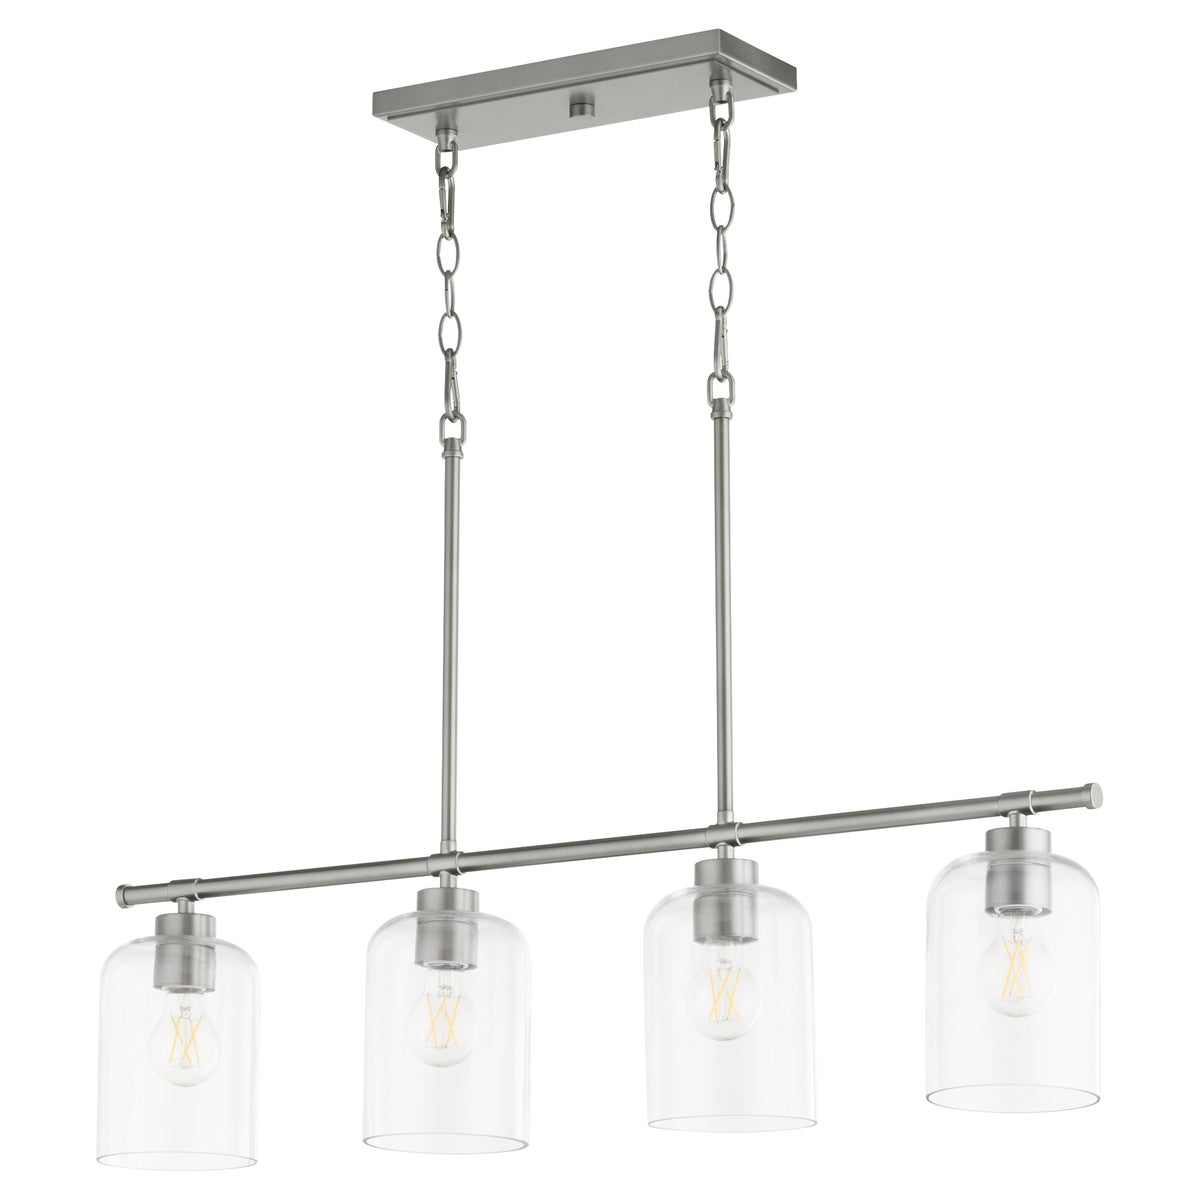 Kitchen Pendant Light: A classic design with clear glass shades fixed to linear frames in matte black, aged brass, or satin nickel finishes. Perfect for indoor and outdoor use, this enduring pendant light provides a subtle, comforting glow.